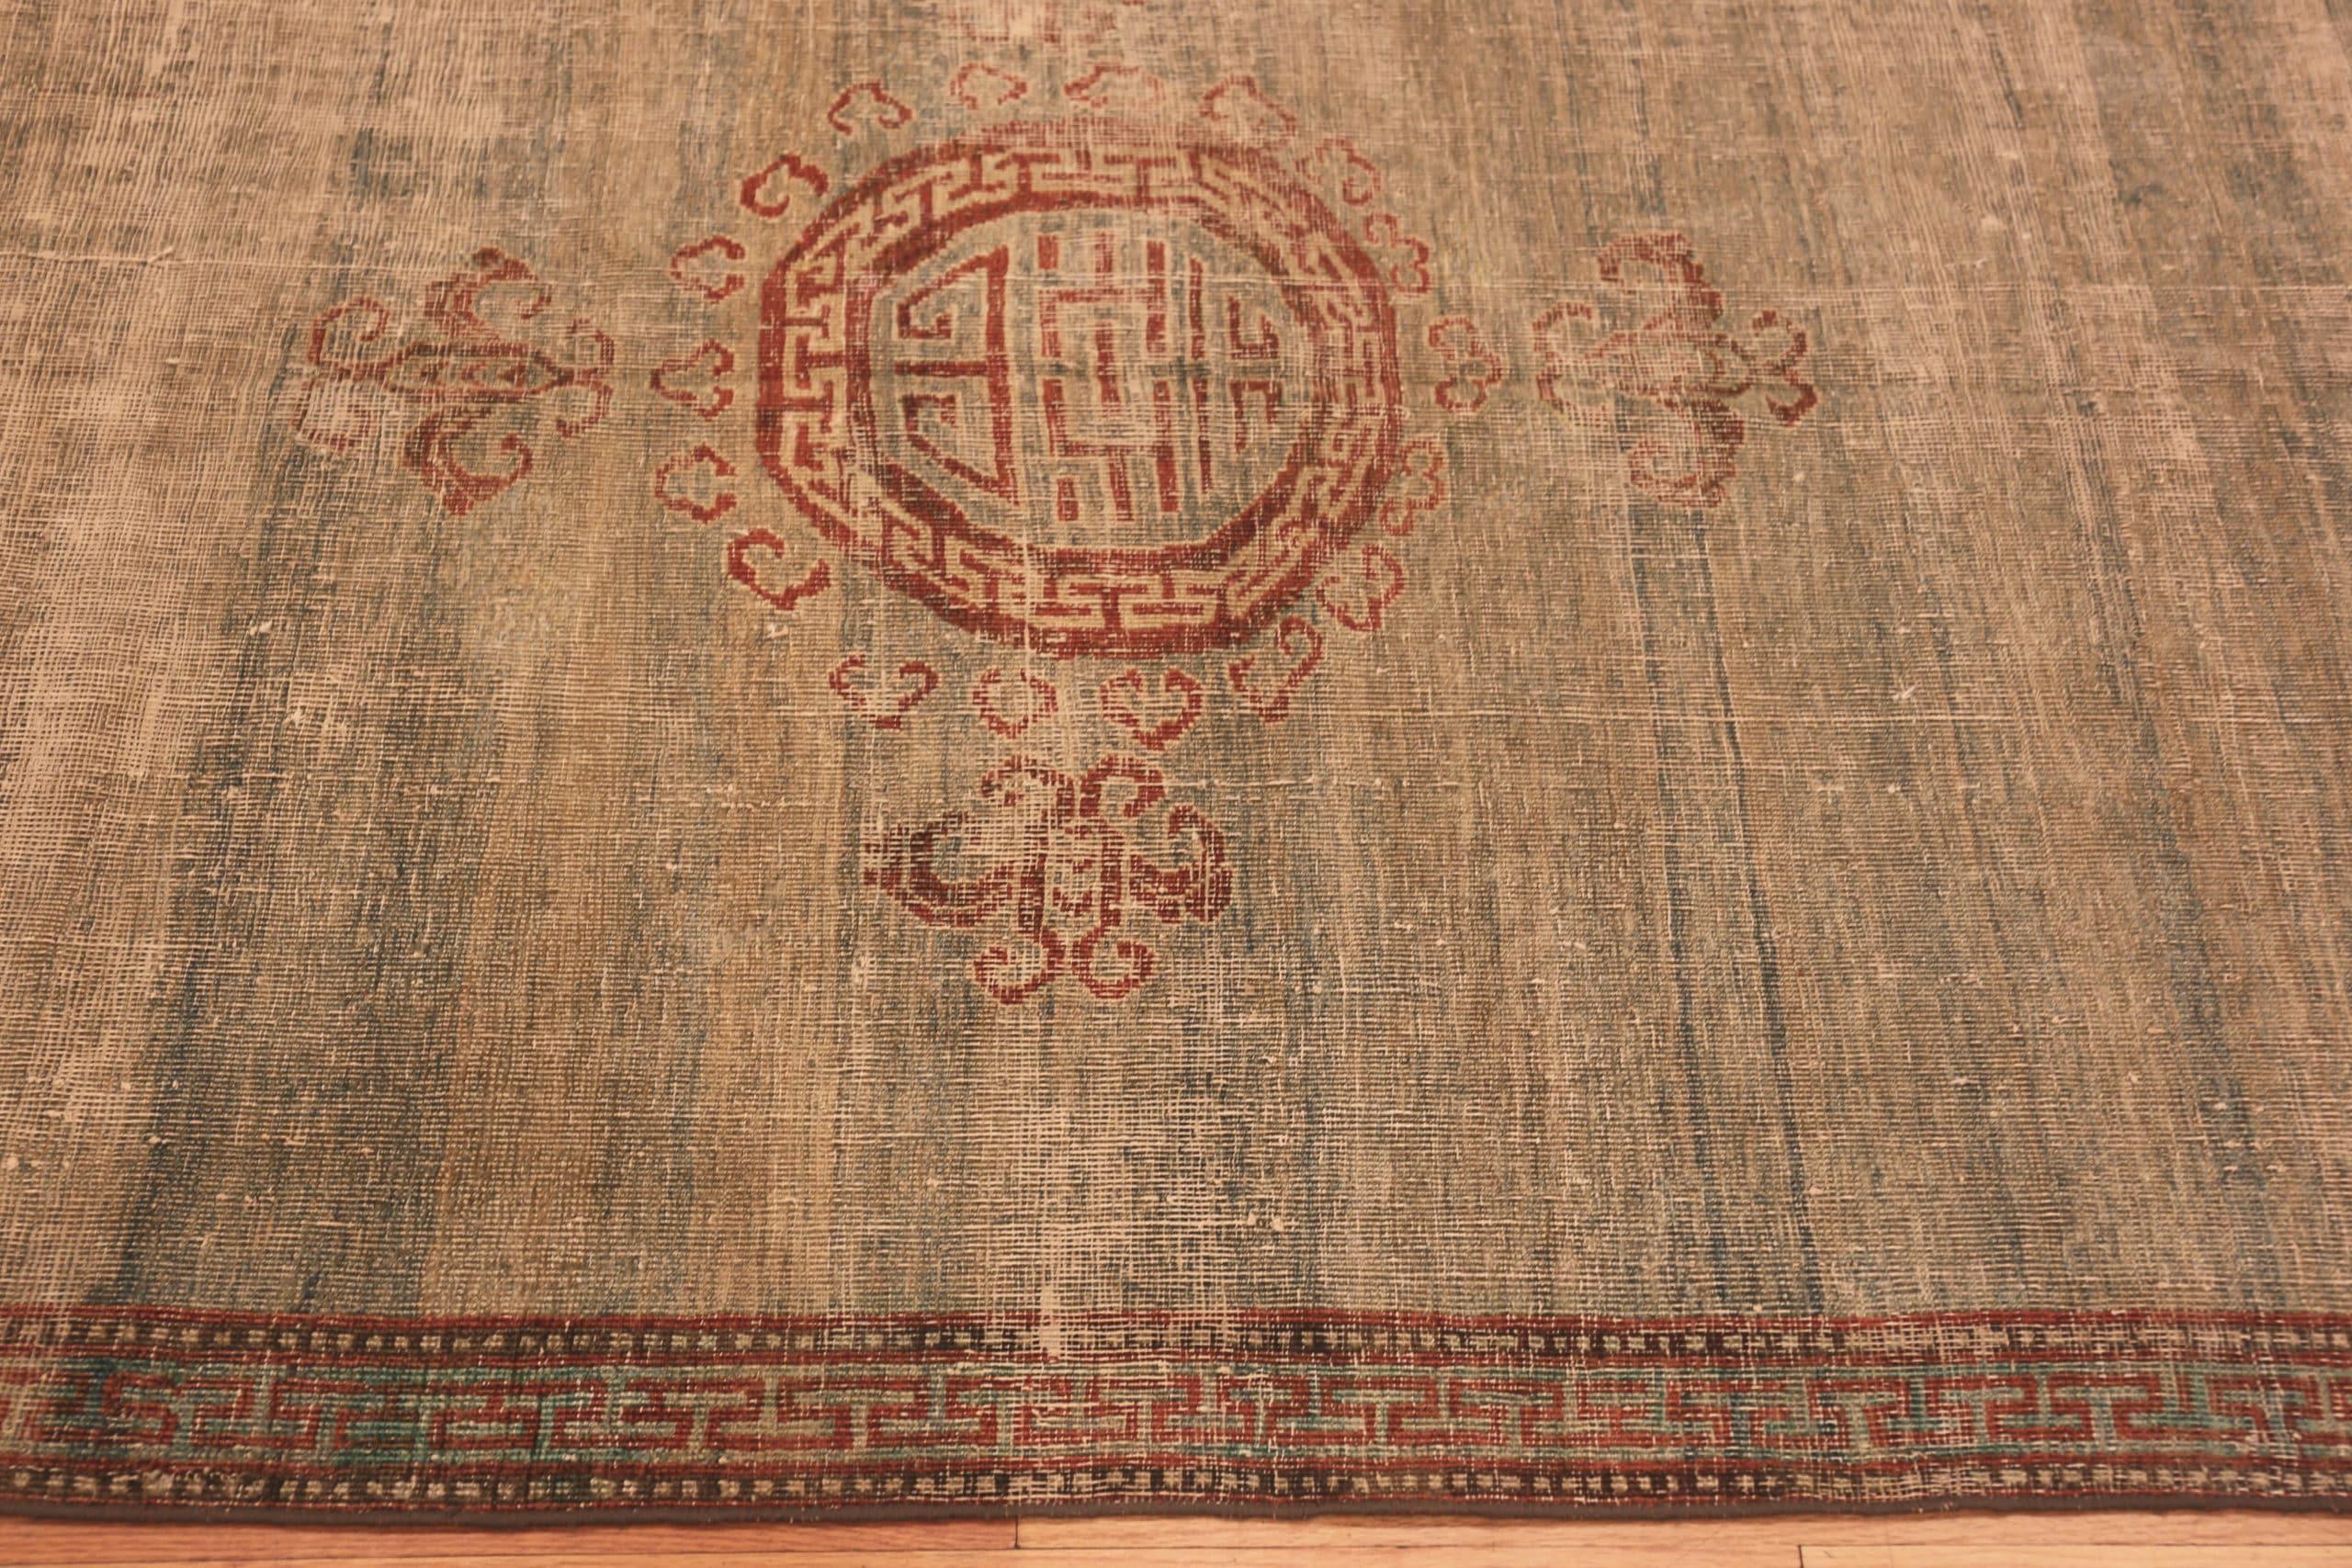 Silk Antique East Turkestan Khotan Rug, Country of Origin / Rug Type: East Turkestan Rugs, Circa date: Early 19th Century. Size: 4 ft 5 in x 9 ft 10 in (1.35 m x 3 m)